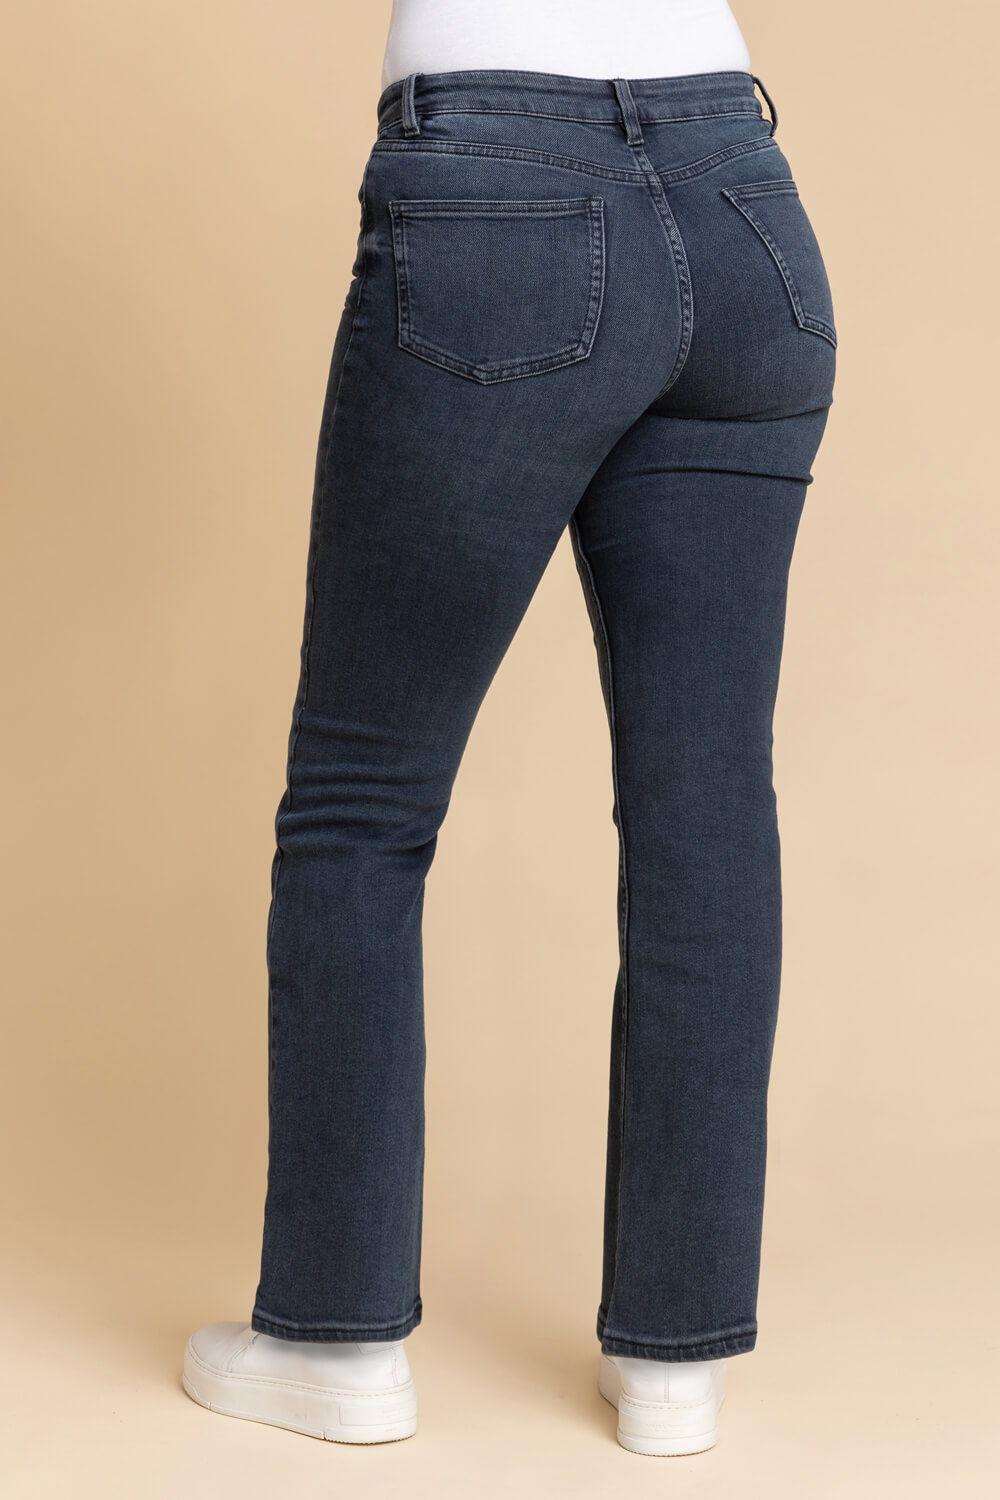 Midnight Blue 29" Essential Stretch Bootcut Jeans, Image 2 of 5